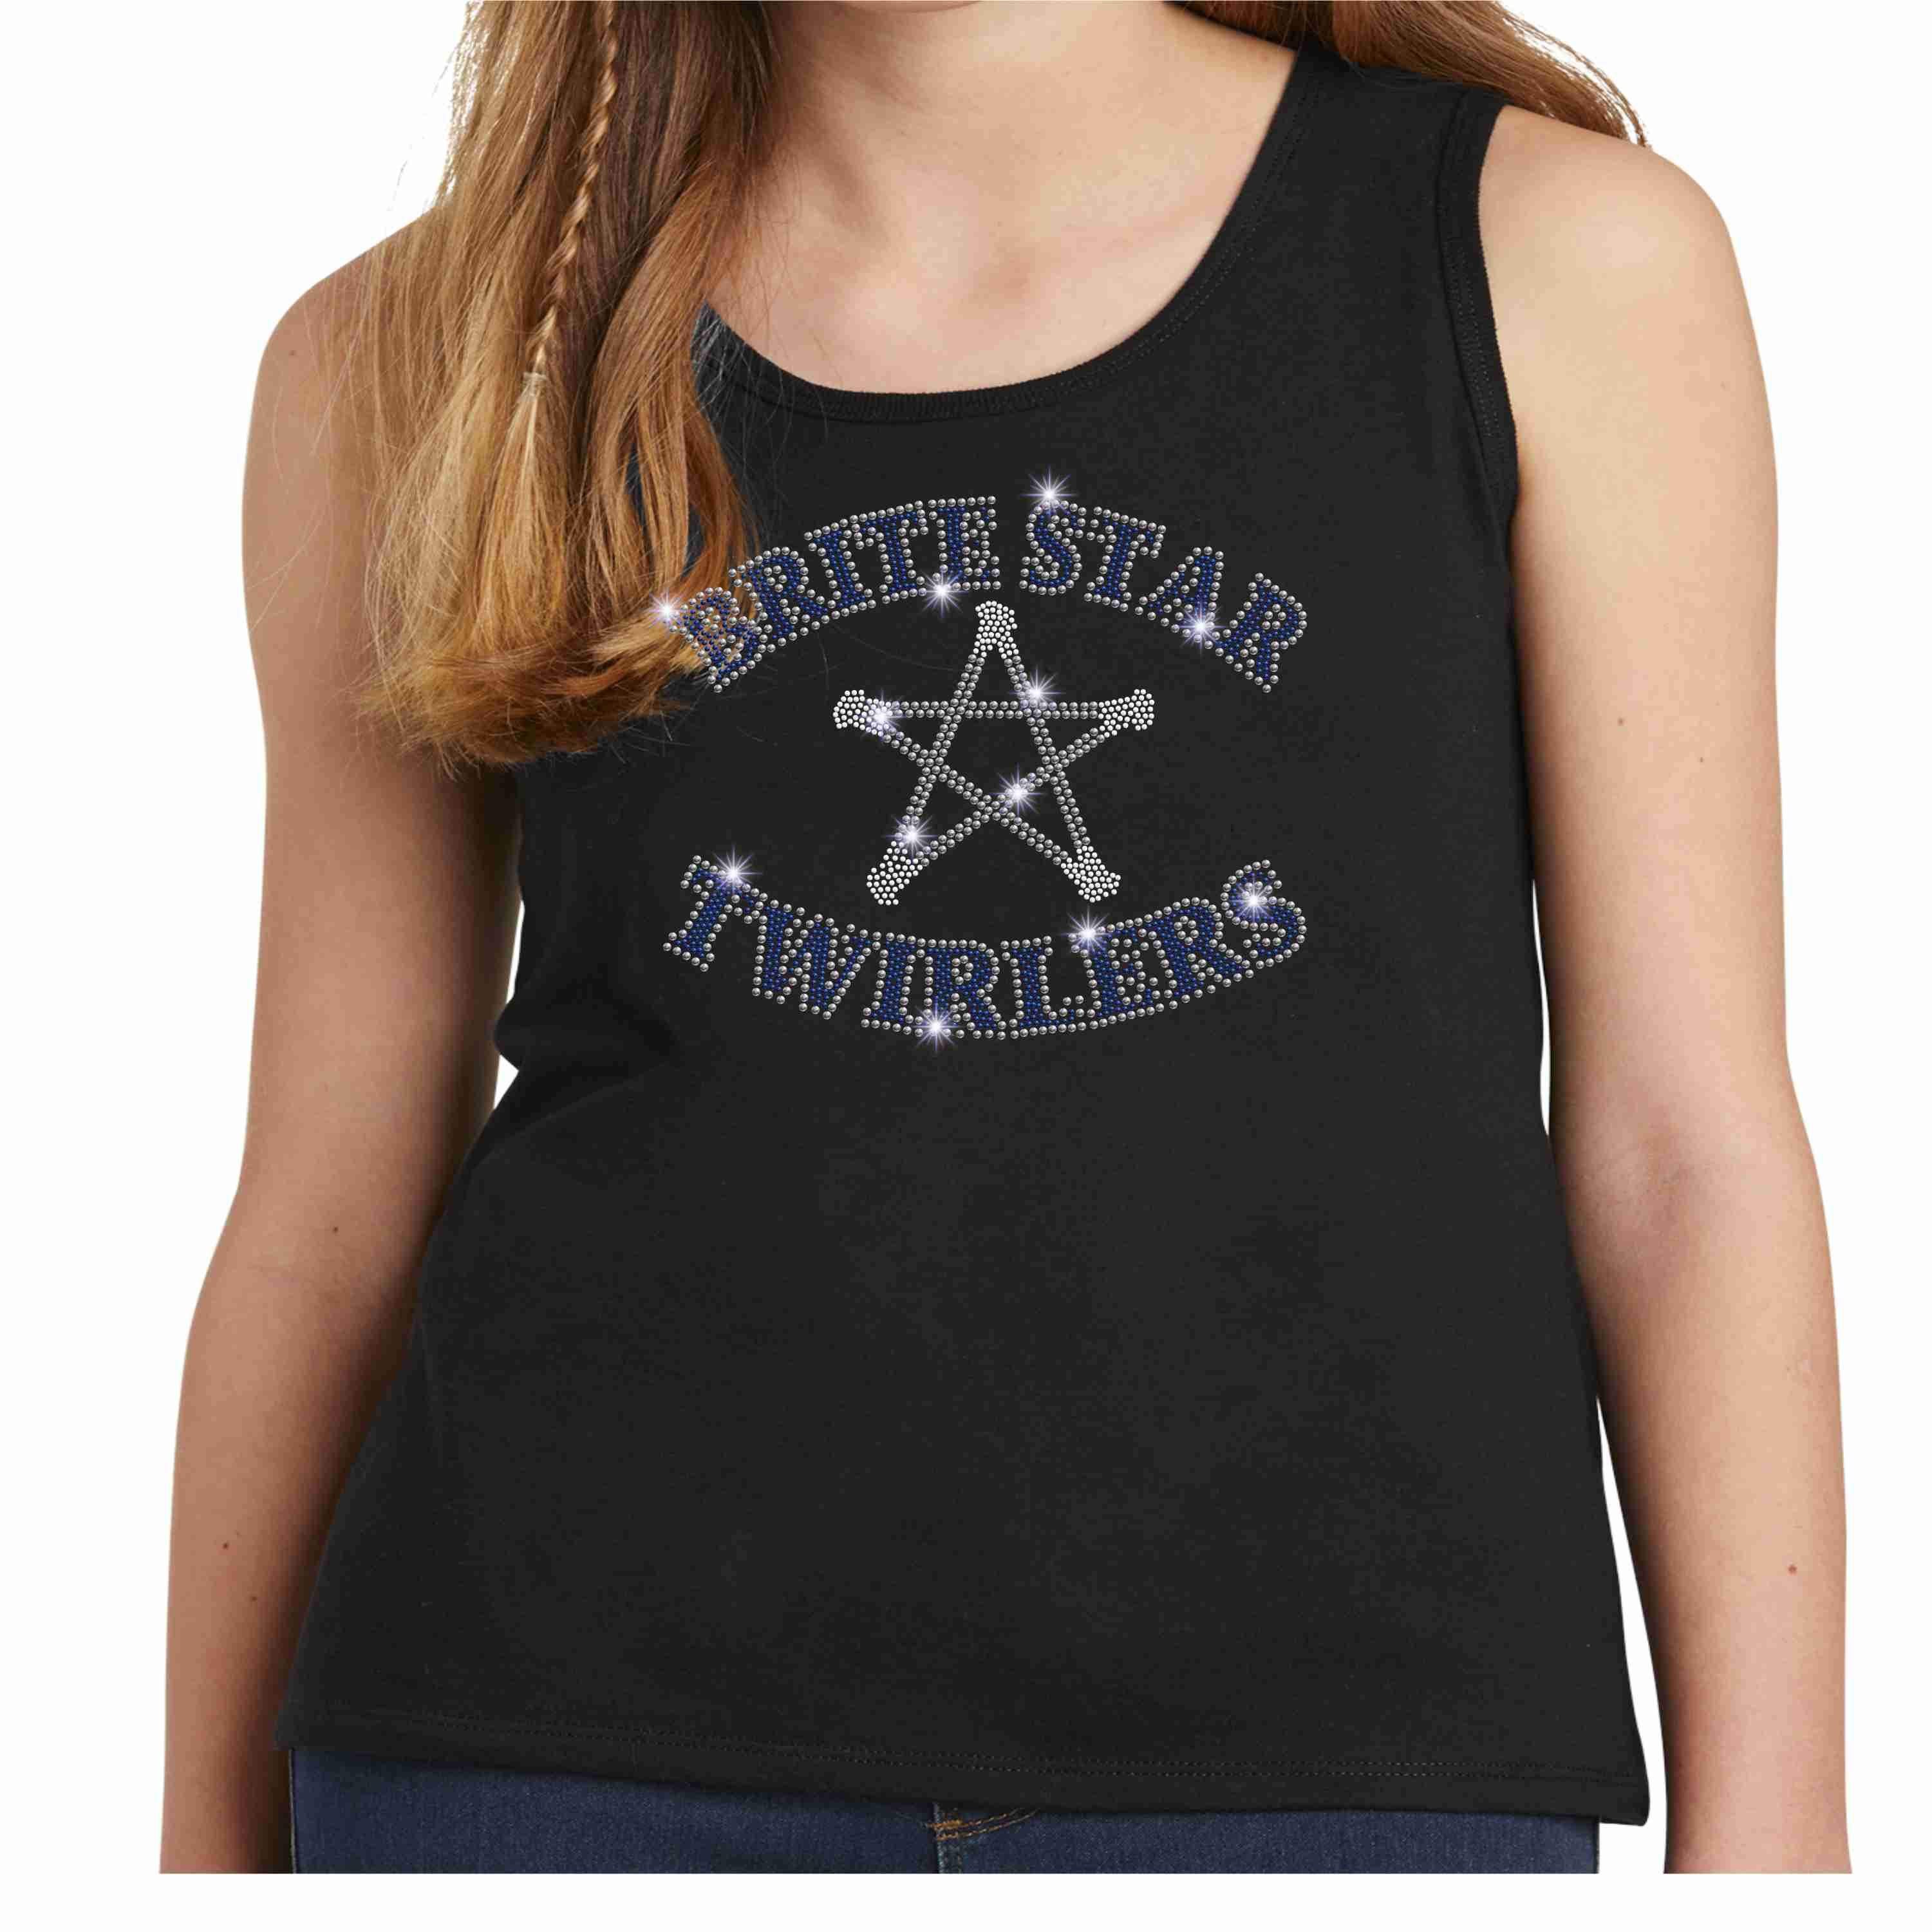 Brite Star Twirlers- Youth Tank Youth Tank Beckys-Boutique.com Girls XS Black 